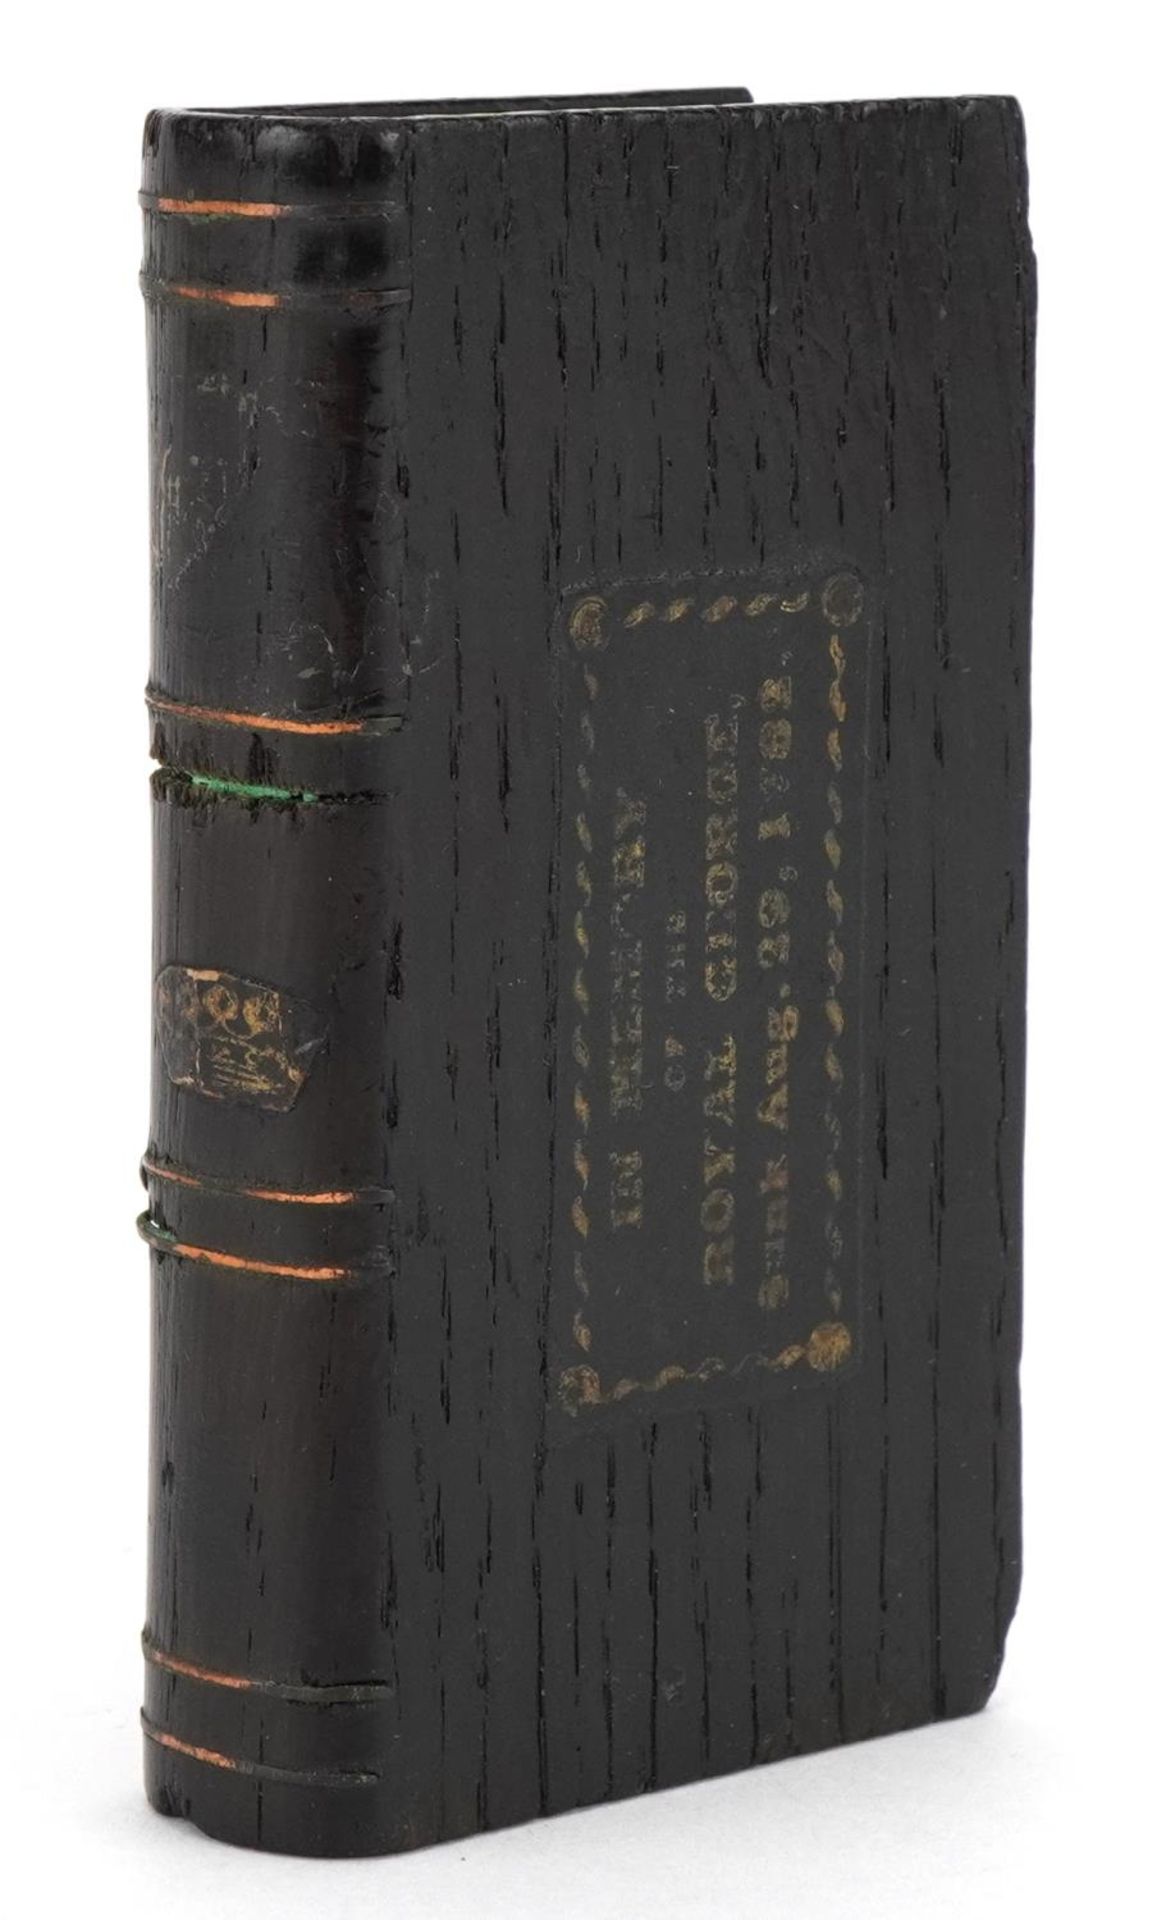 19th century Naval interest treen book made from part of the wreck of the Royal George sunk August